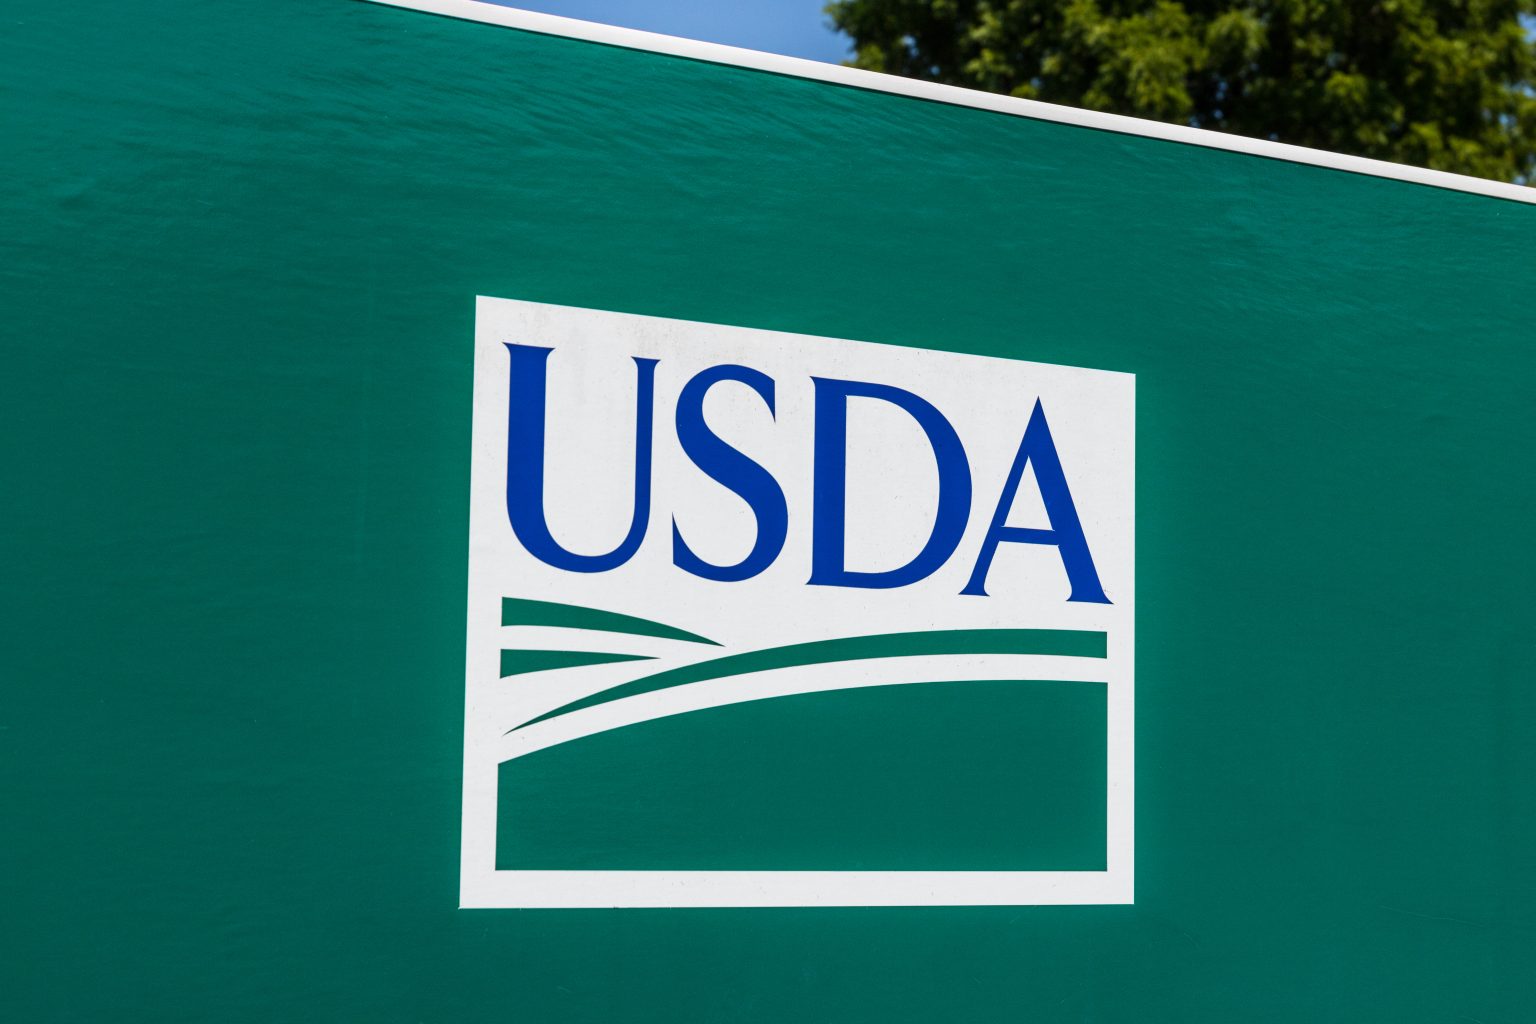 USDA commits to nutrition security and behavioural health research